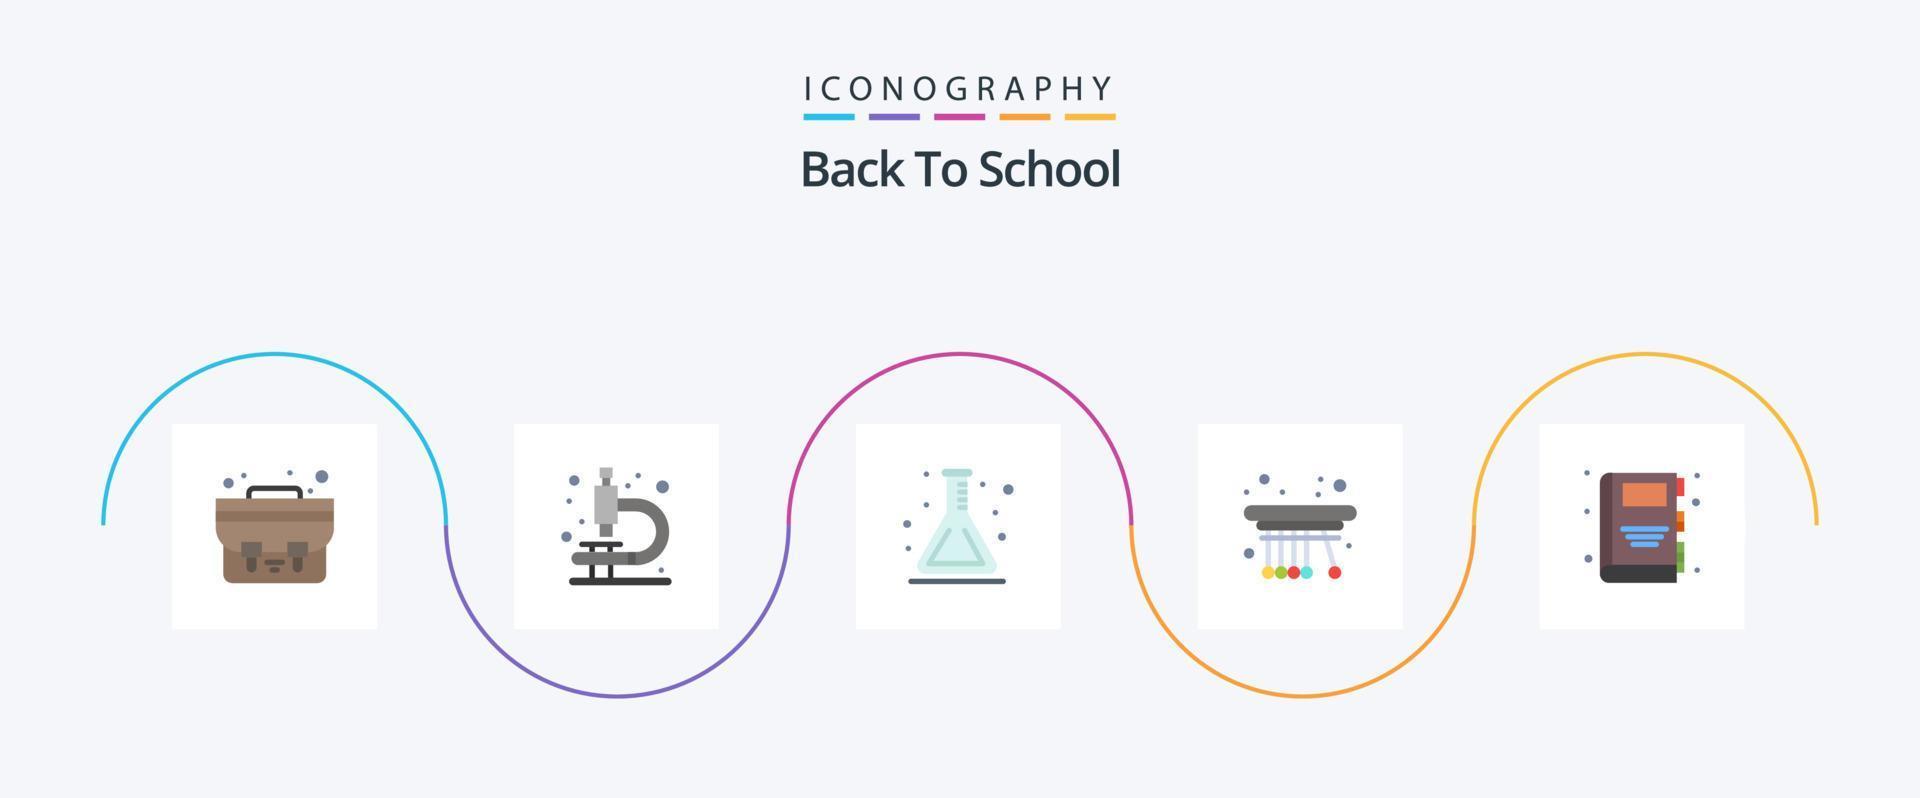 Back To School Flat 5 Icon Pack Including . e book. flask. back to school. physics vector